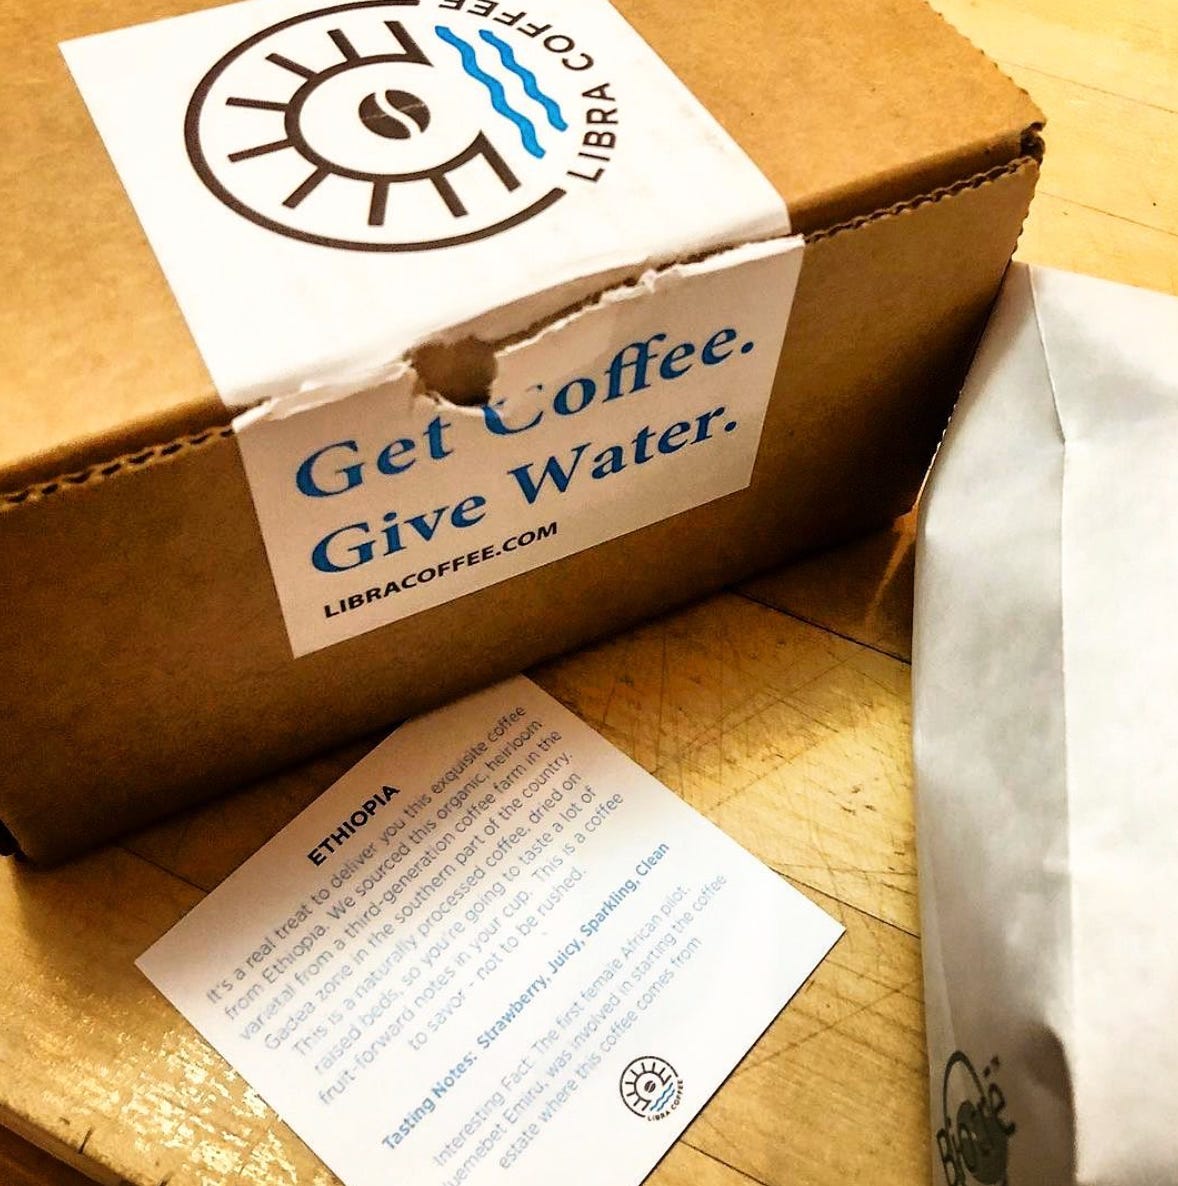 A brown cardboard box, small, with a packaging lable torn that says "Get Coffee. Give Water. Libra Coffee.com" and a description for the Ethiopia coffee inside.